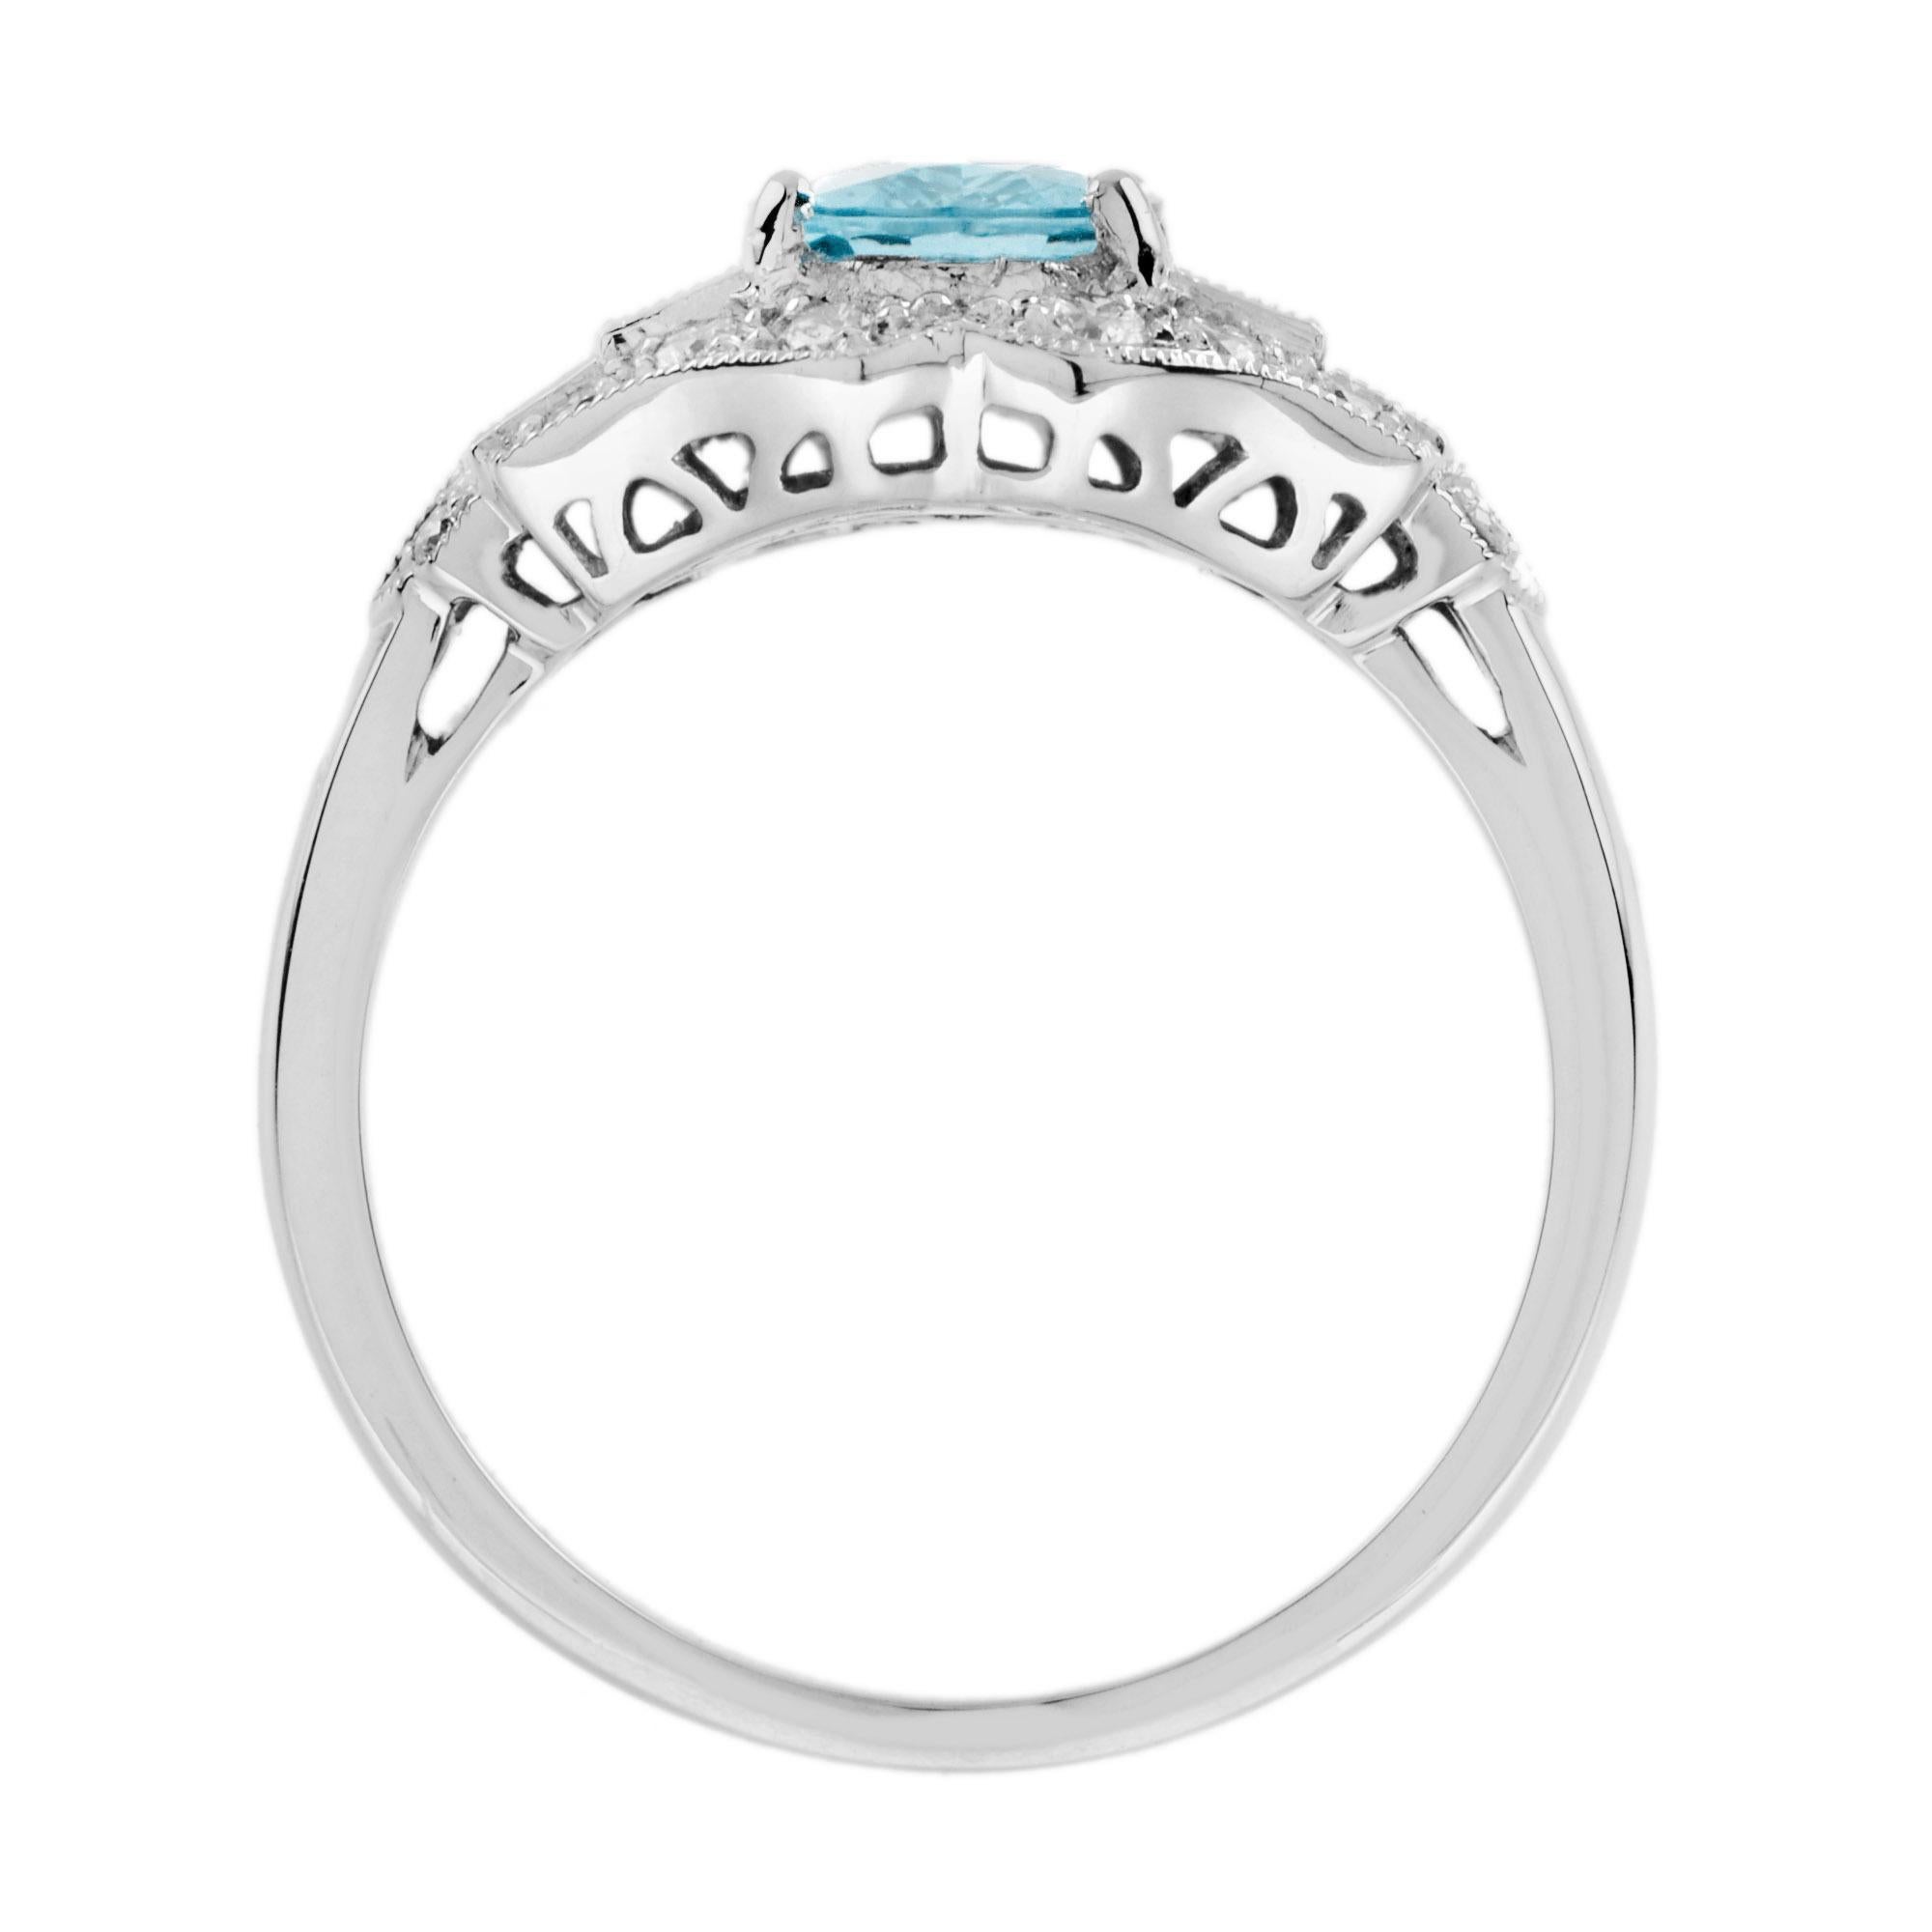 For Sale:  1.50 Ct. Aquamarine and Diamond Art Deco Style Engagement Ring in 18K Gold 6